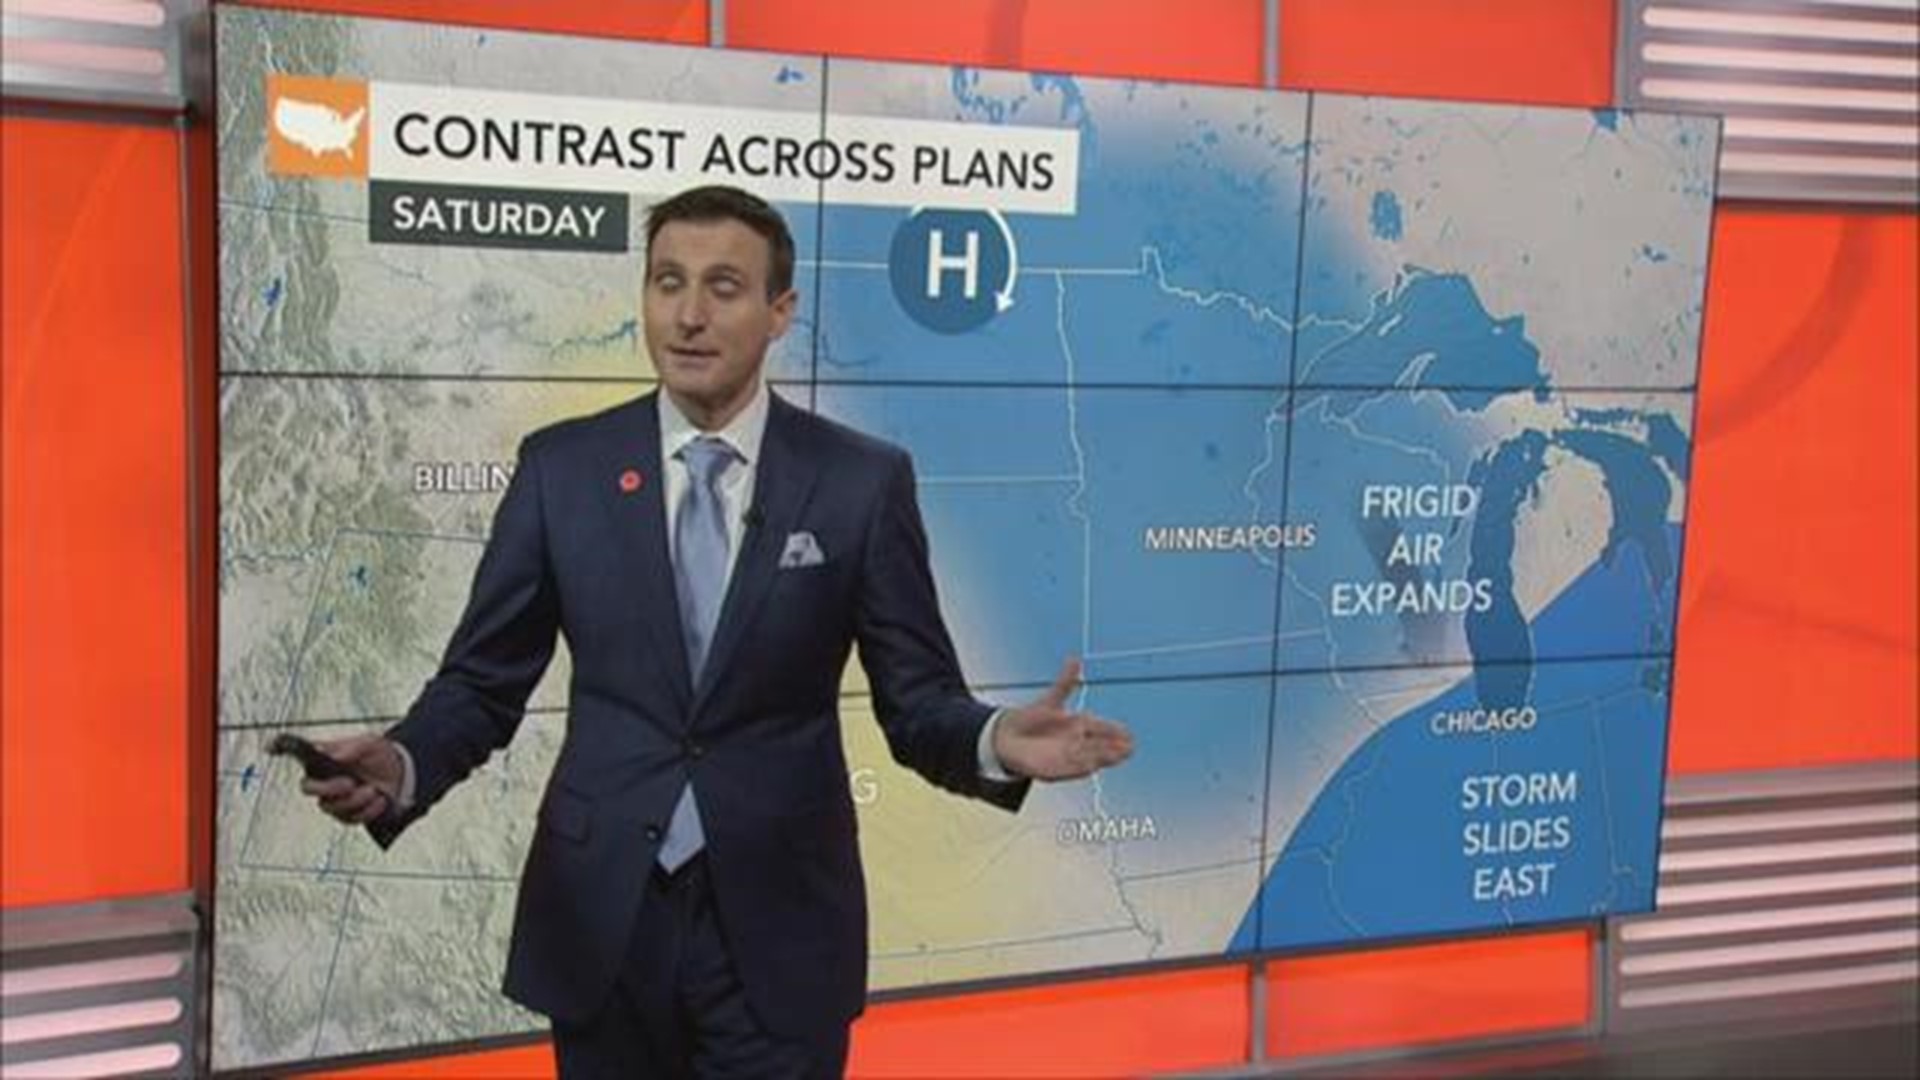 A major winter storm will unleash blizzard conditions and ice from the Midwest to Northeast this weekend, as sister marches take place on Saturday.